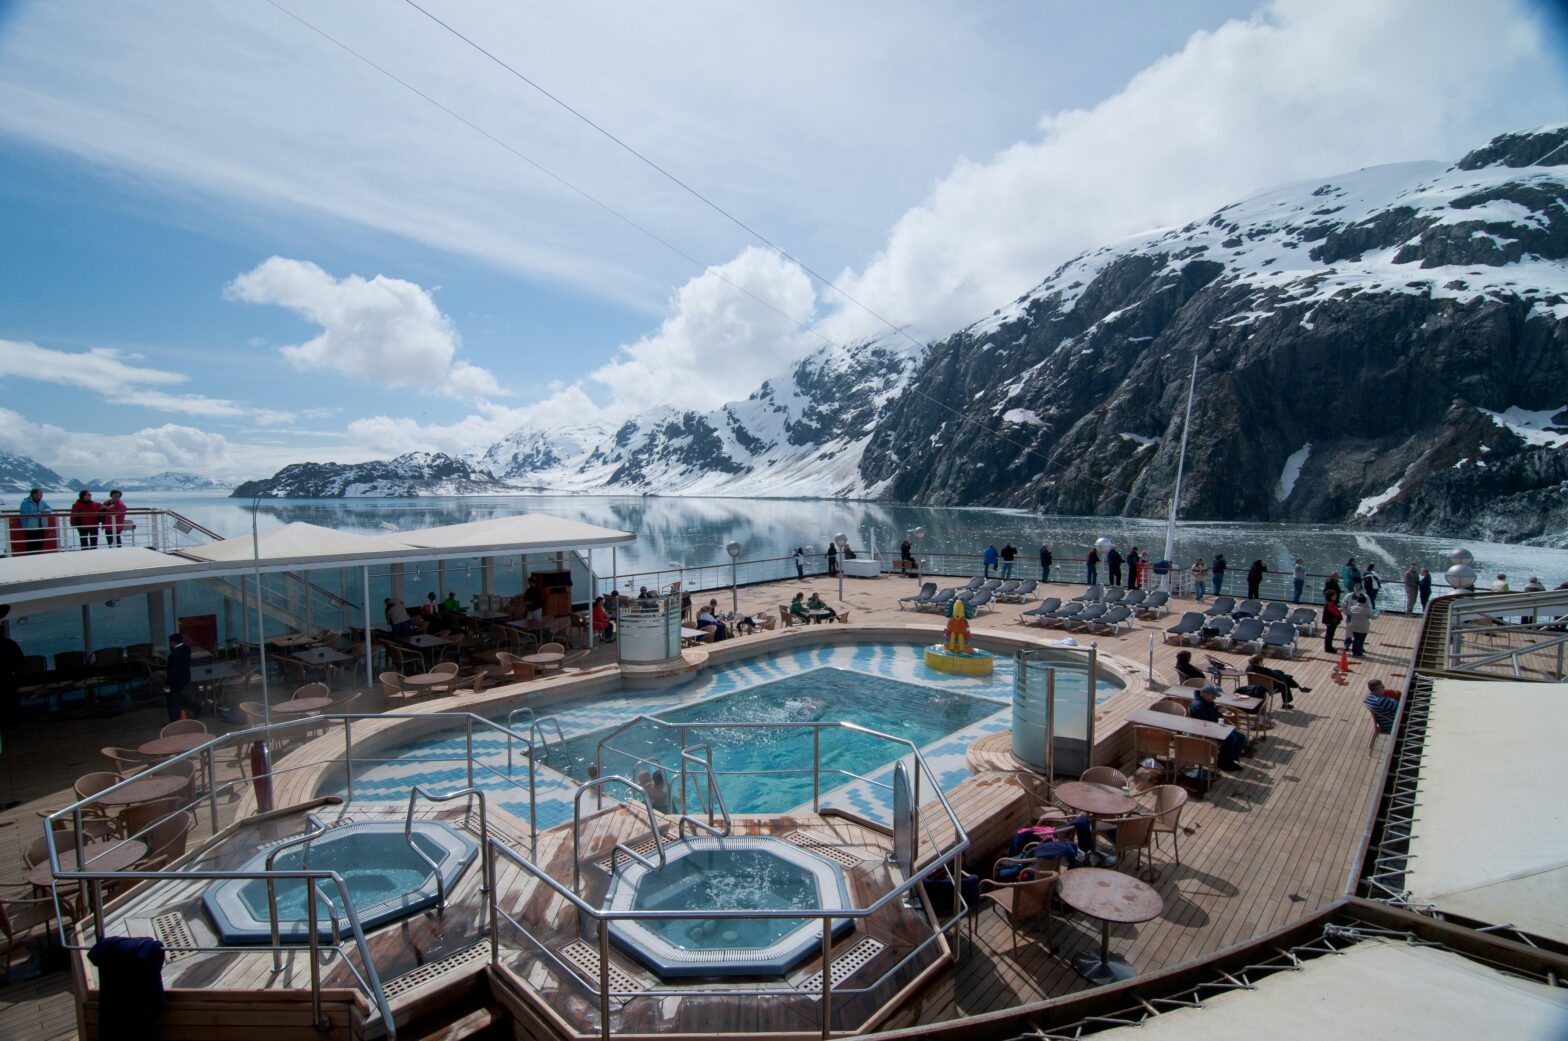 The Top 10 Shore Excursions for Alaskan Cruises